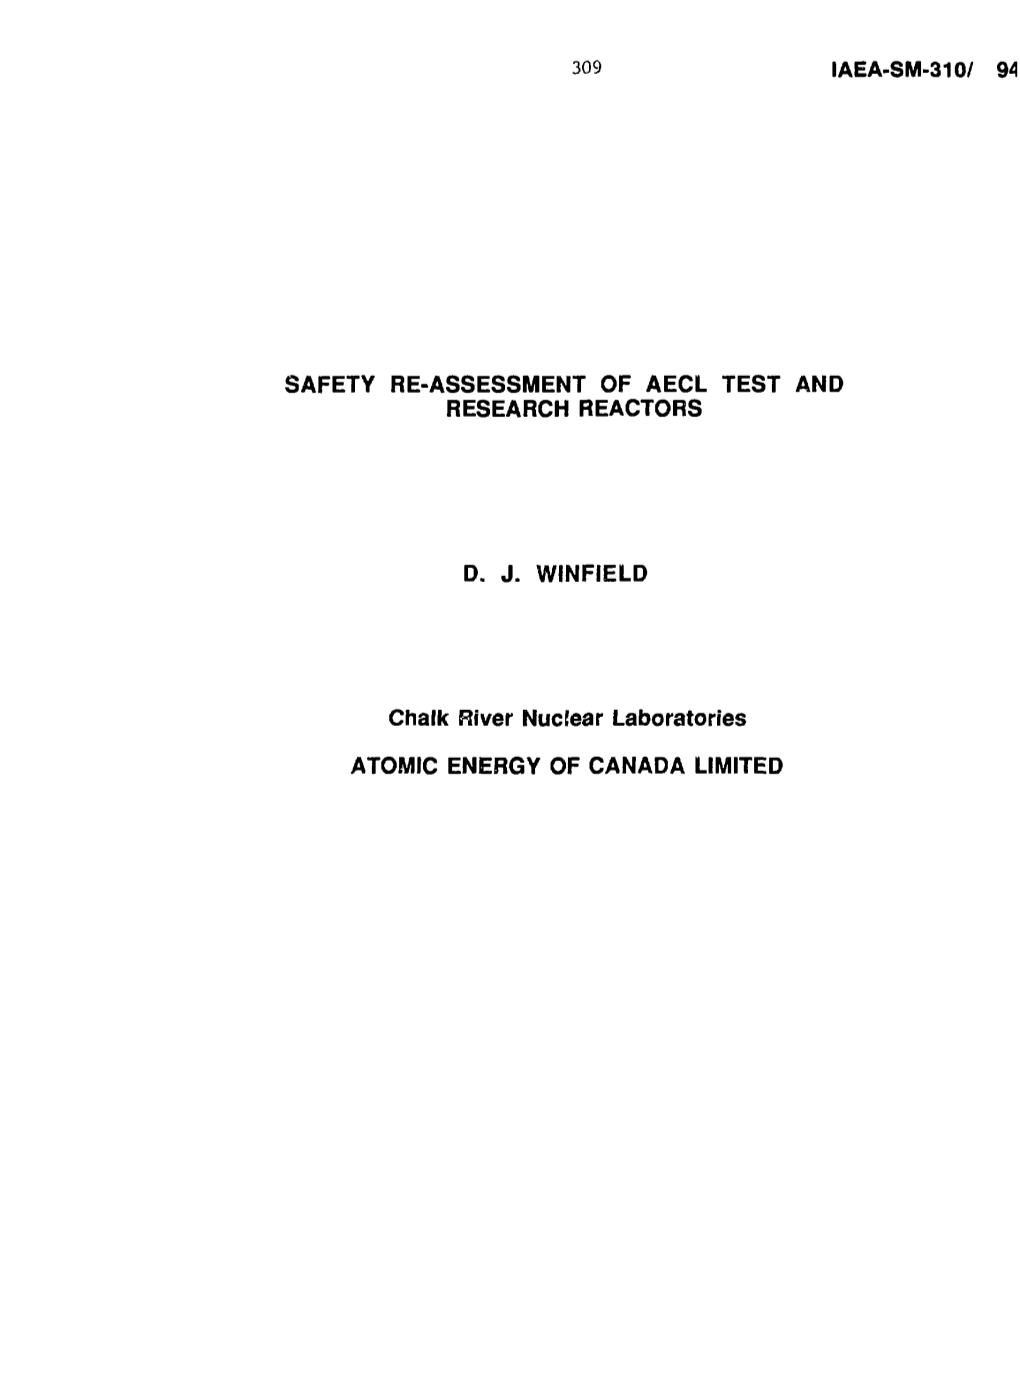 SAFETY RE-ASSESSMENT of AECL TEST and RESEARCH REACTORS D. J. WINFIELD Chalk River Nuclear Laboratories ATOMIC ENERGY of CANADA